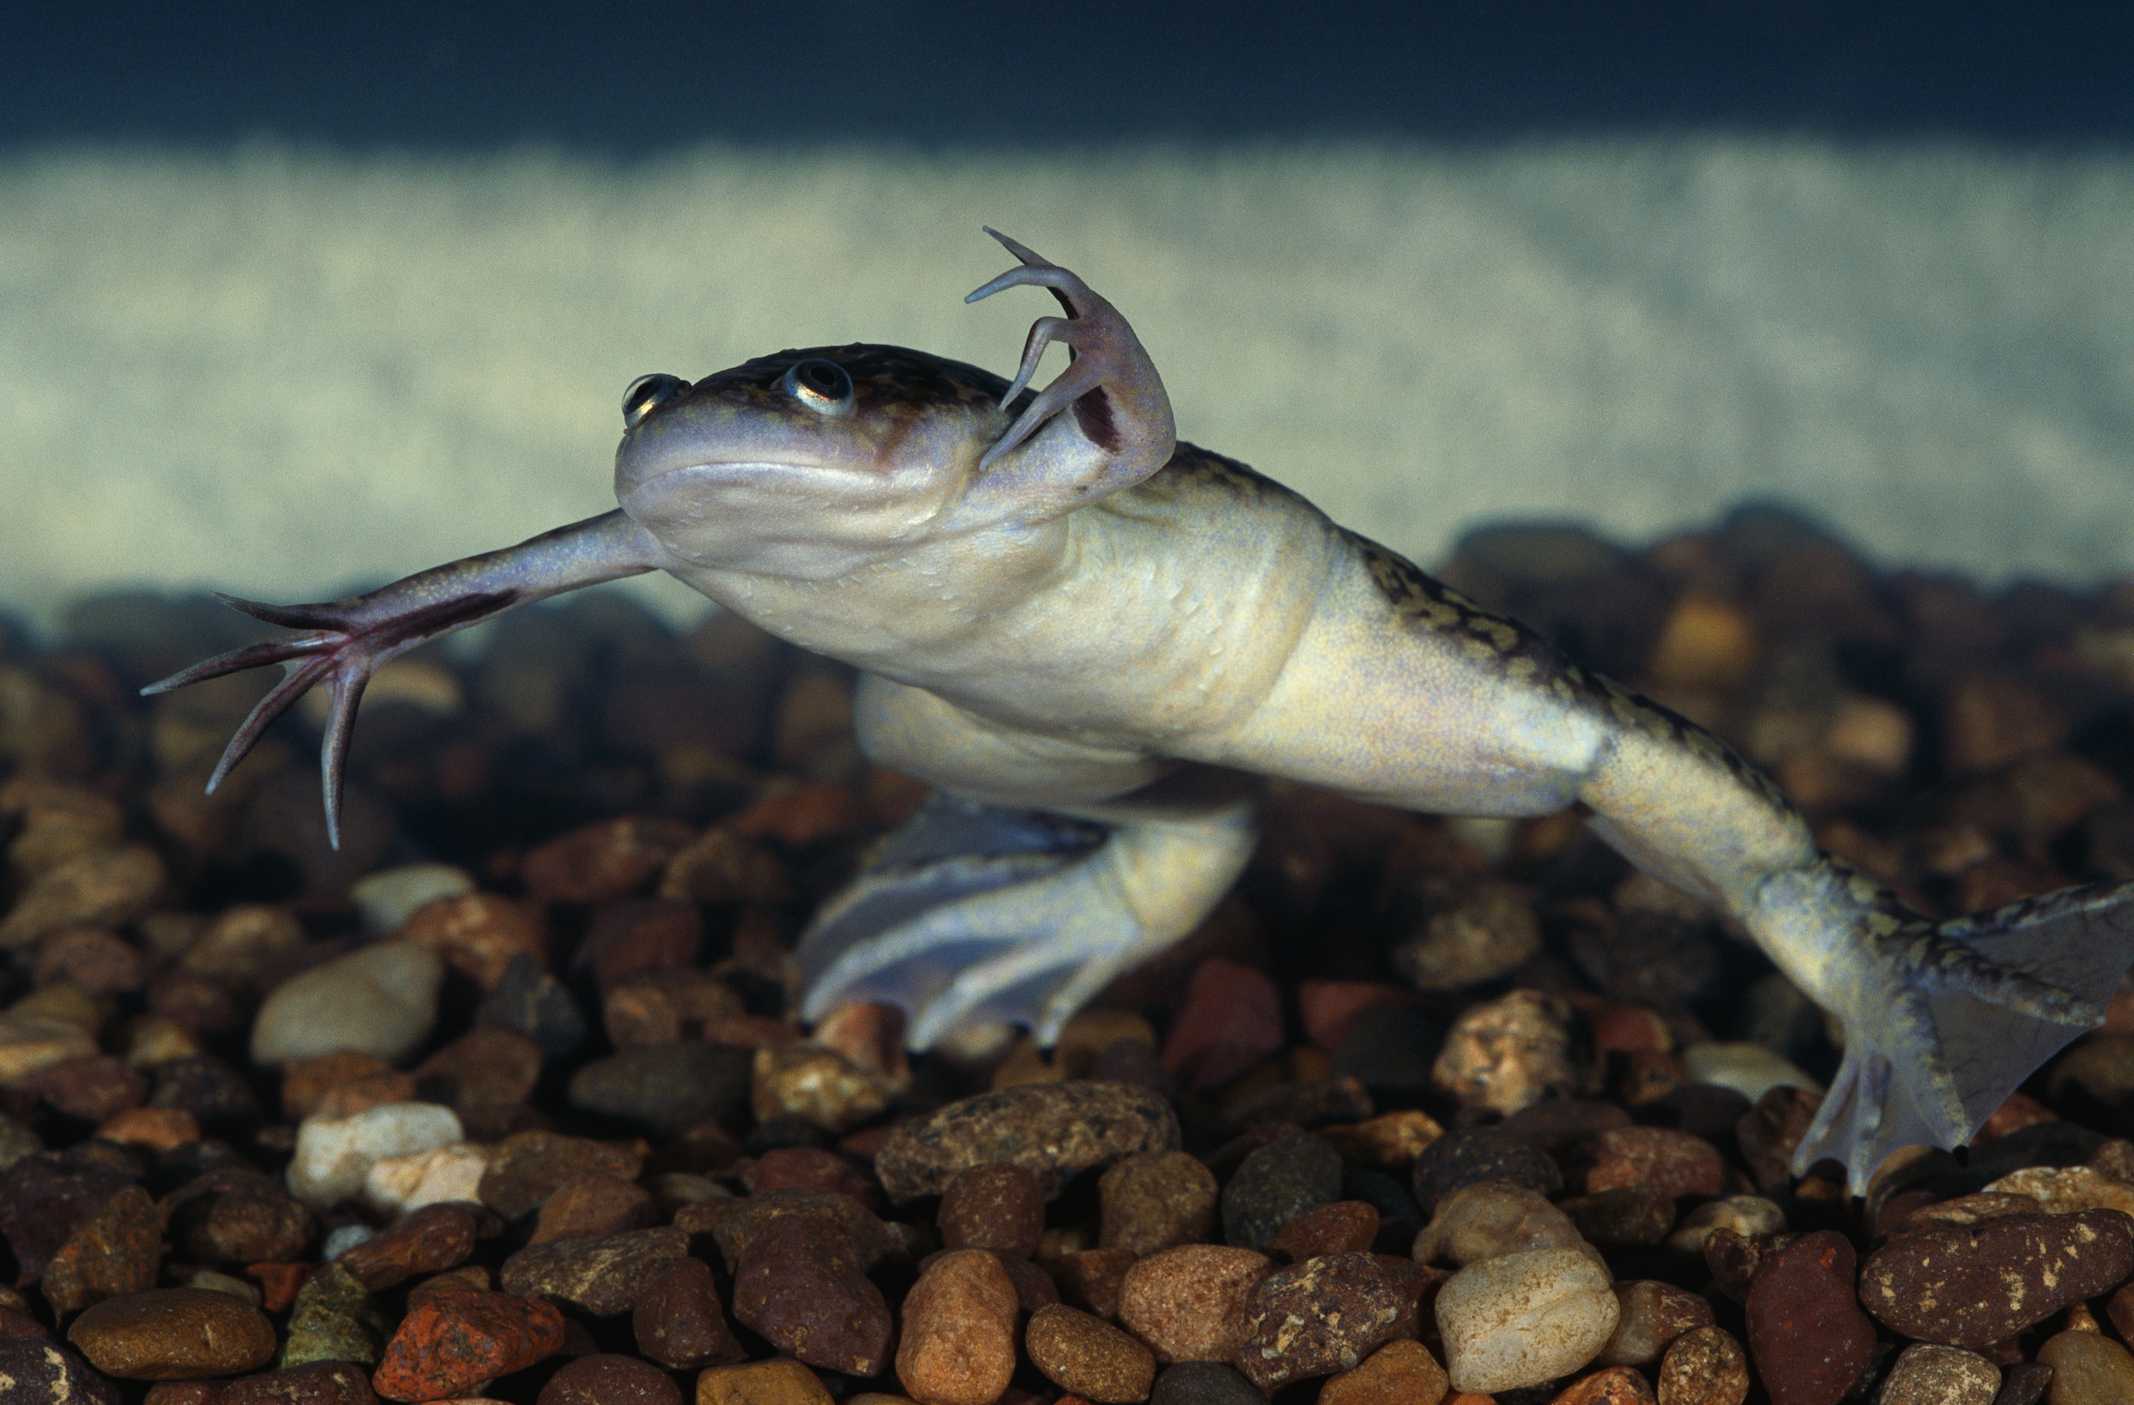 African Clawed Frog floating in the water